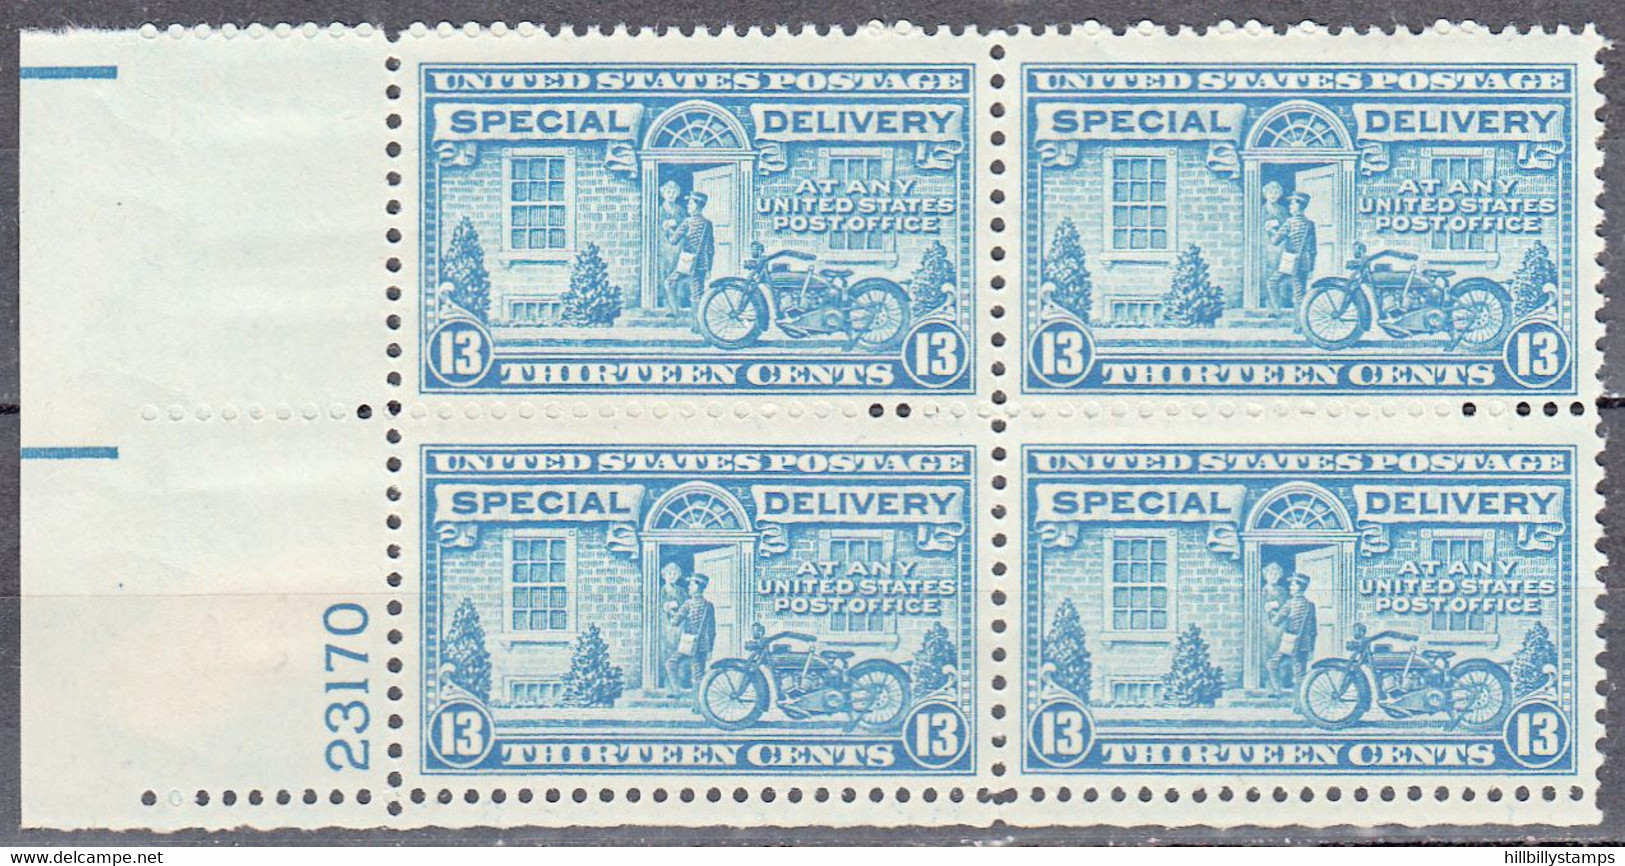 UNITED STATES    SCOTT NO E17   MNH   YEAR  1944 - Special Delivery, Registration & Certified